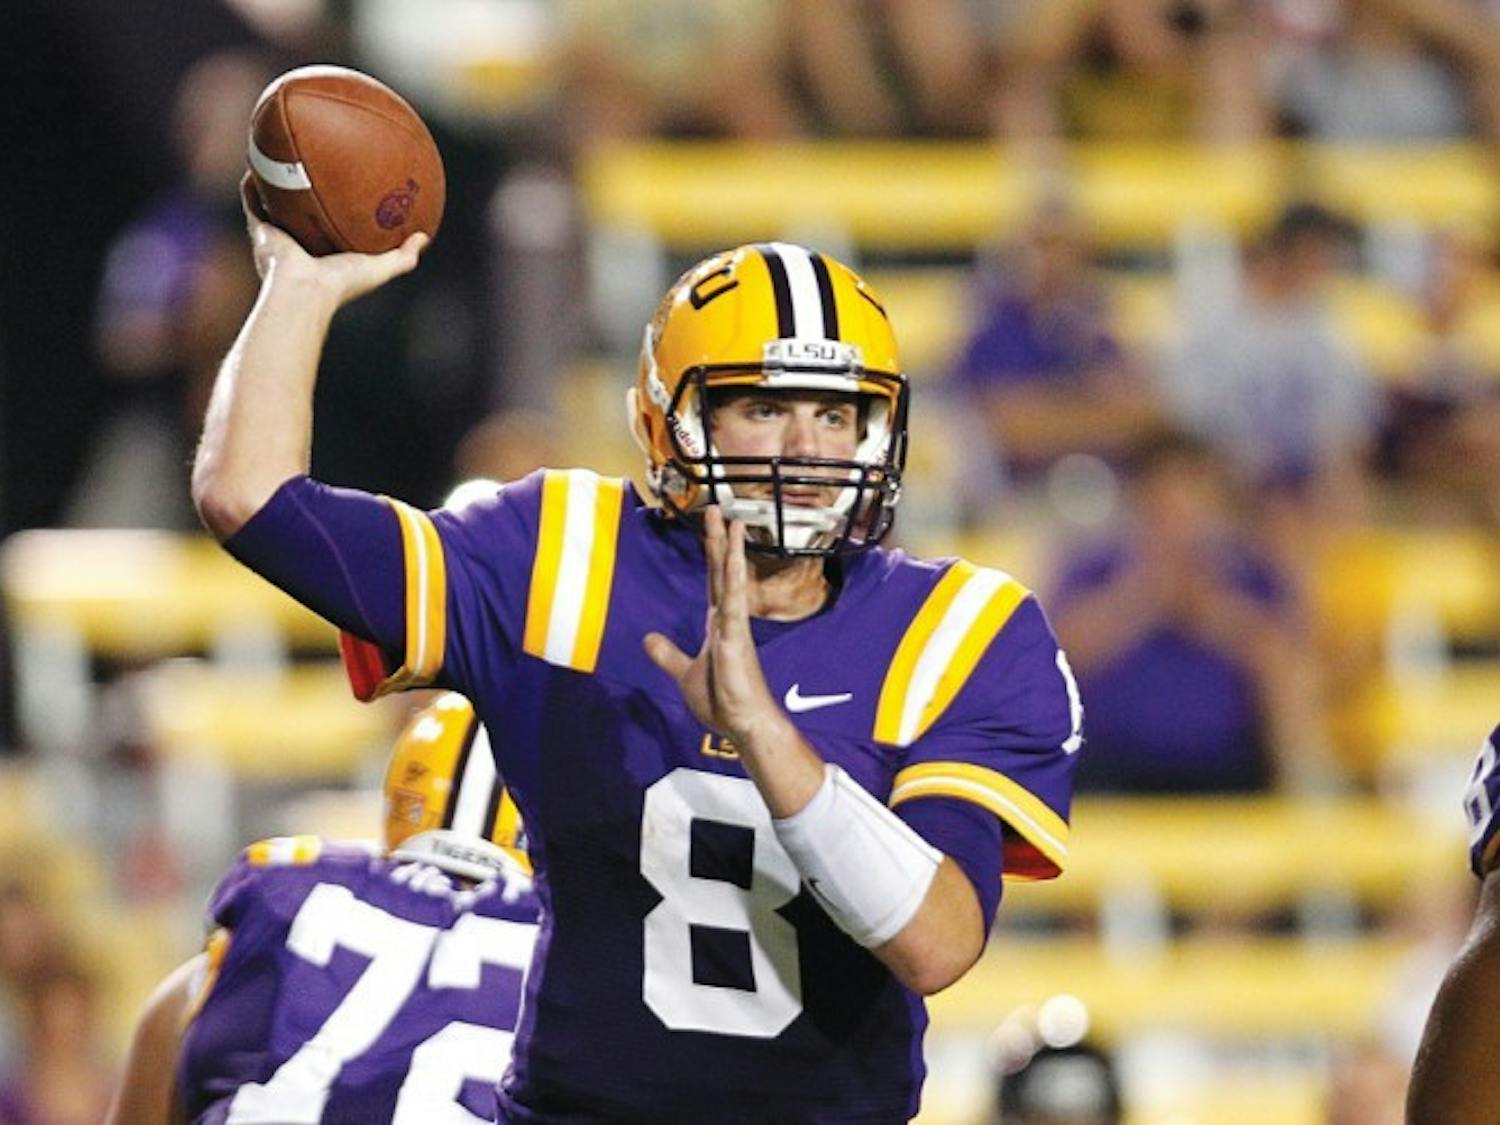 LSU quarterback Zach Mettenberger (8) drops back to pass in the second half of their NCAA college football game against Idaho in Baton Rouge, La. Saturday, Sept. 15, 2012. LSU won 63-14.